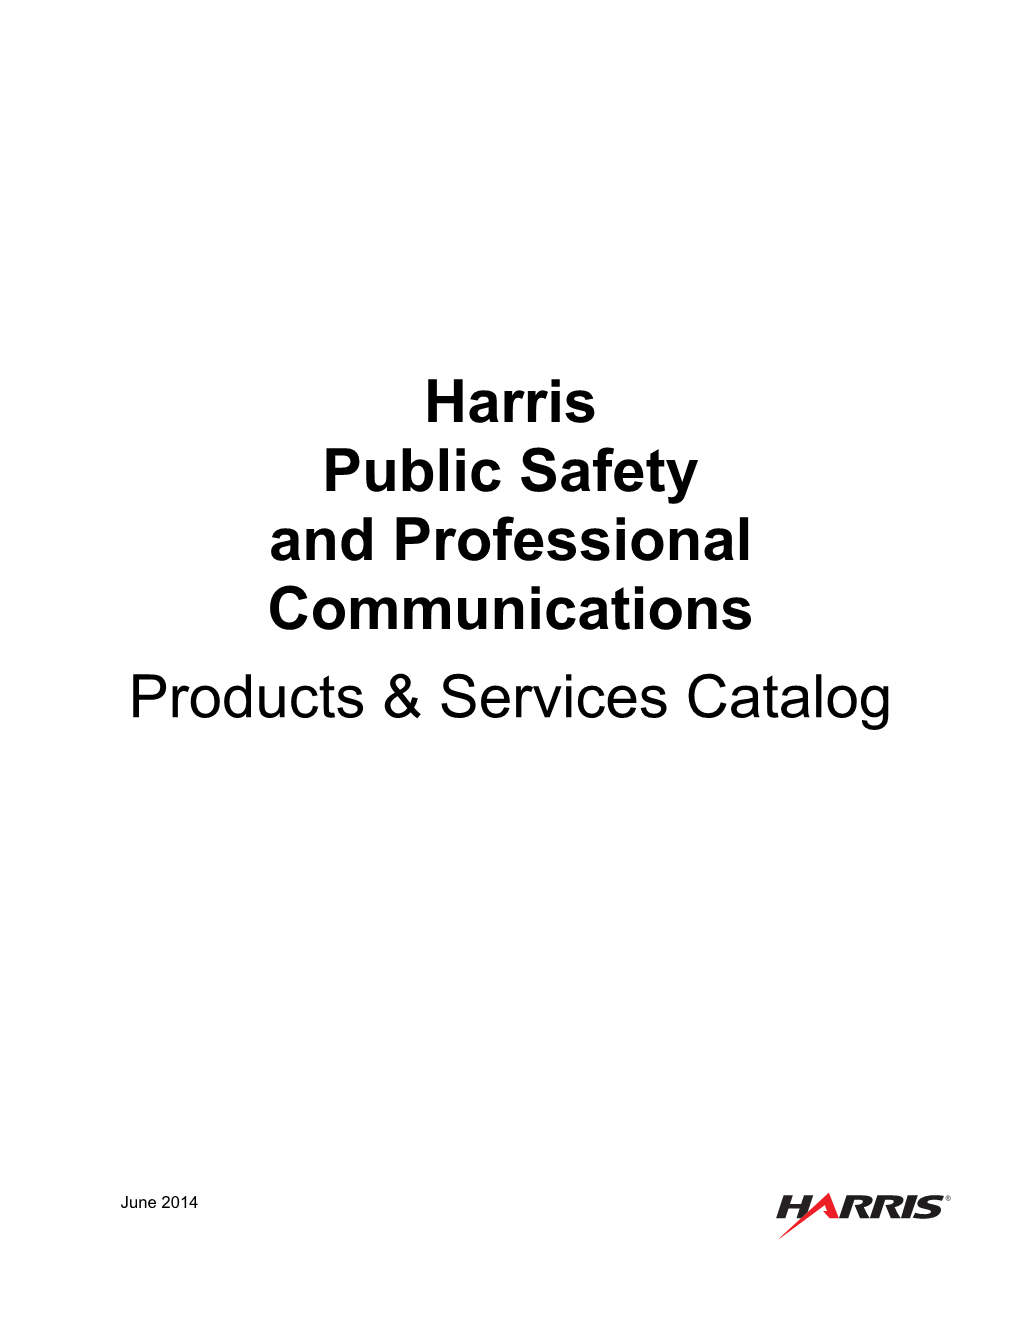 Harris Public Safety and Professional Communications Products